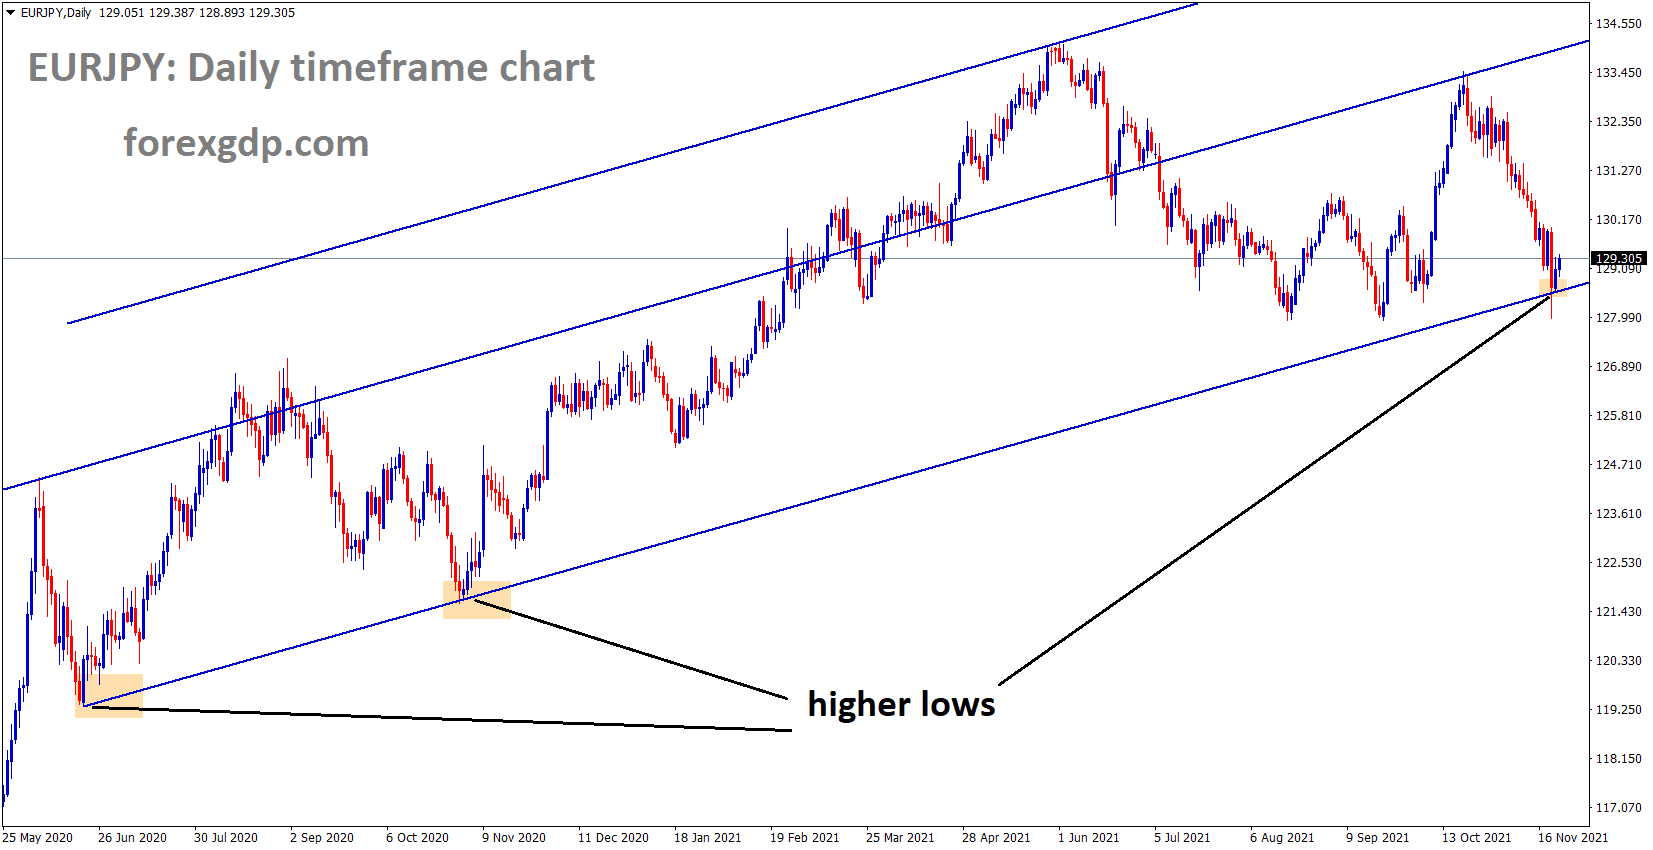 EURJPY is moving in an Ascending channel and the market is rebounding from the Higher low area of the channel